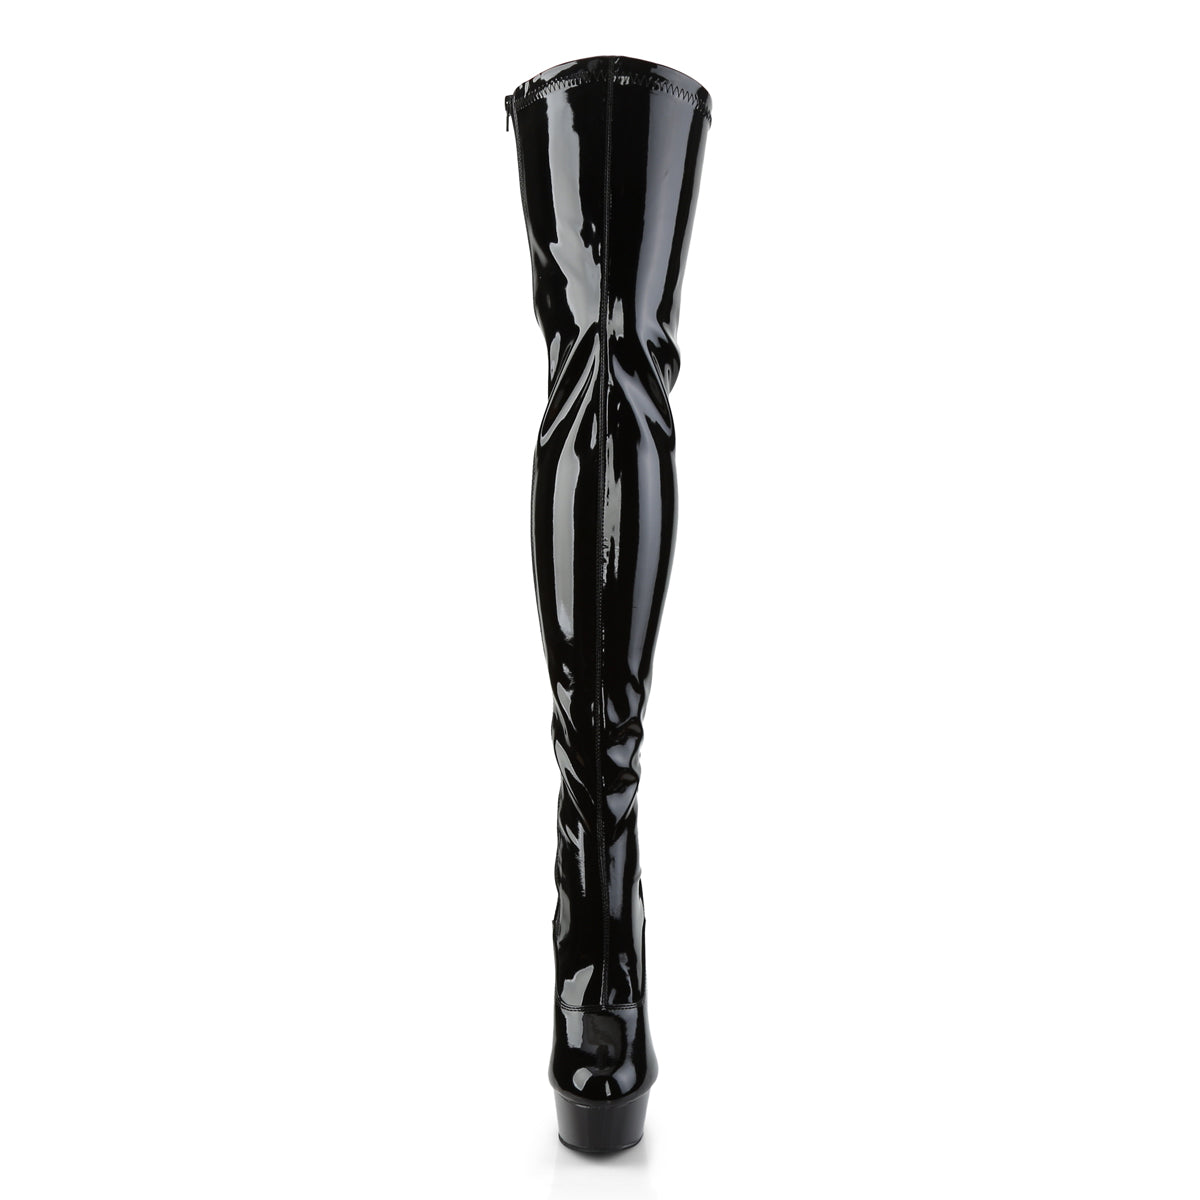 DELIGHT-3063 / B / M 6 "PLEASER FAST DELIVERY 24-48h 